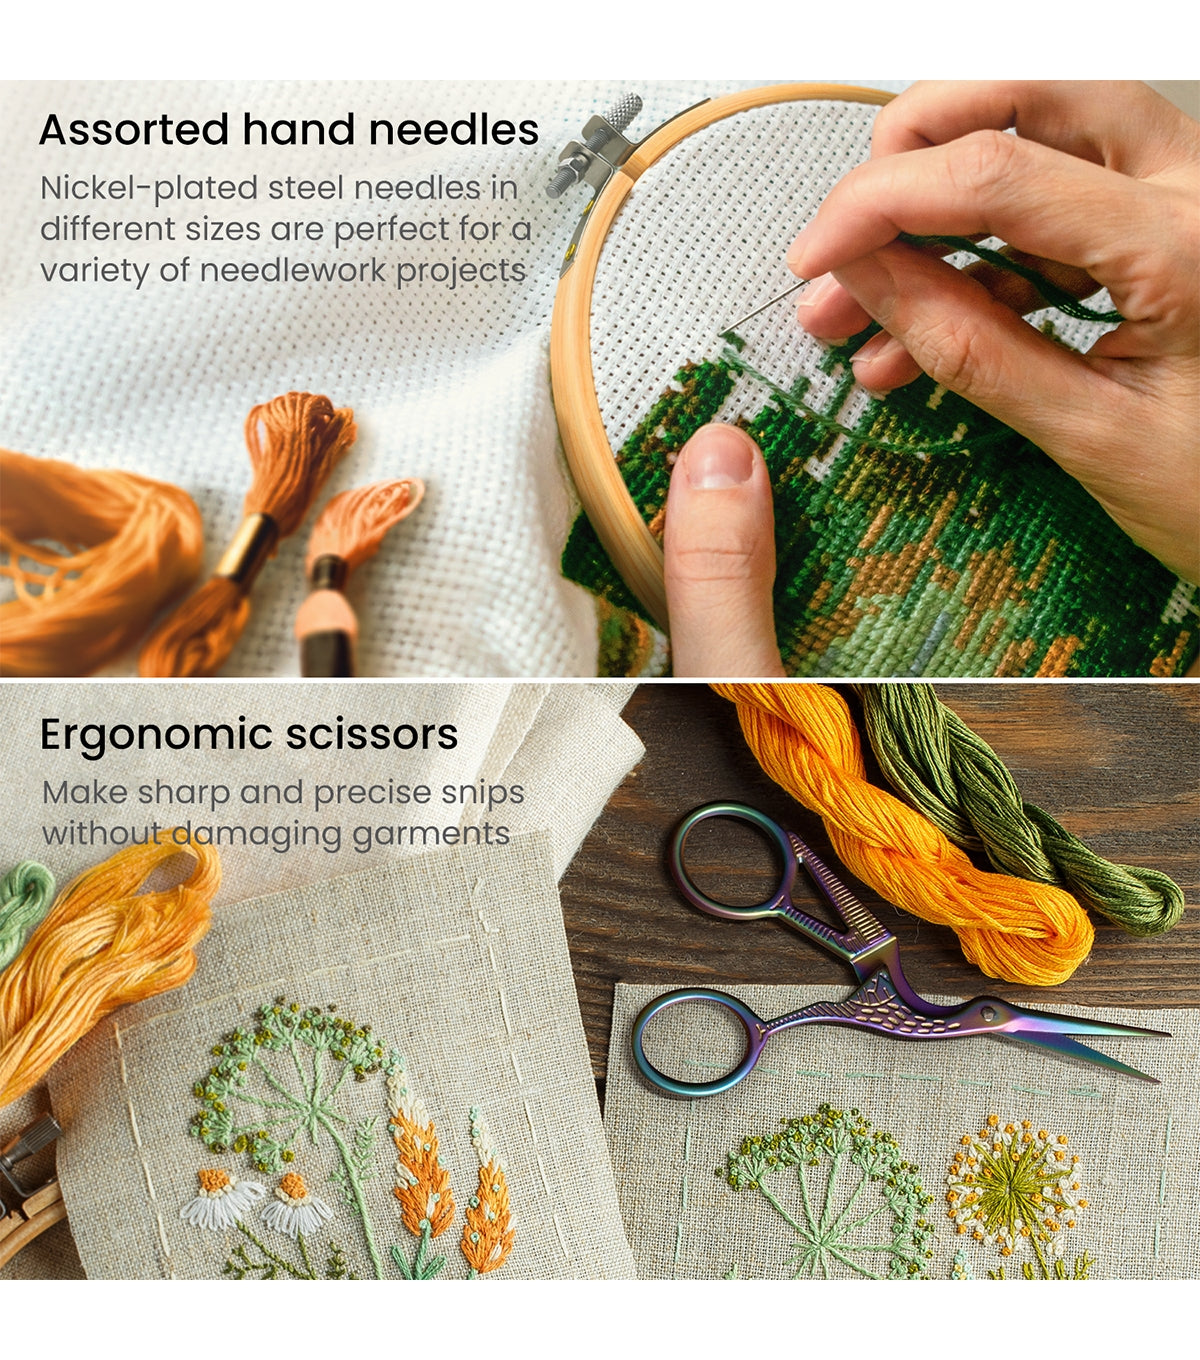 Hand embroidery needles - all you need to know to choose one